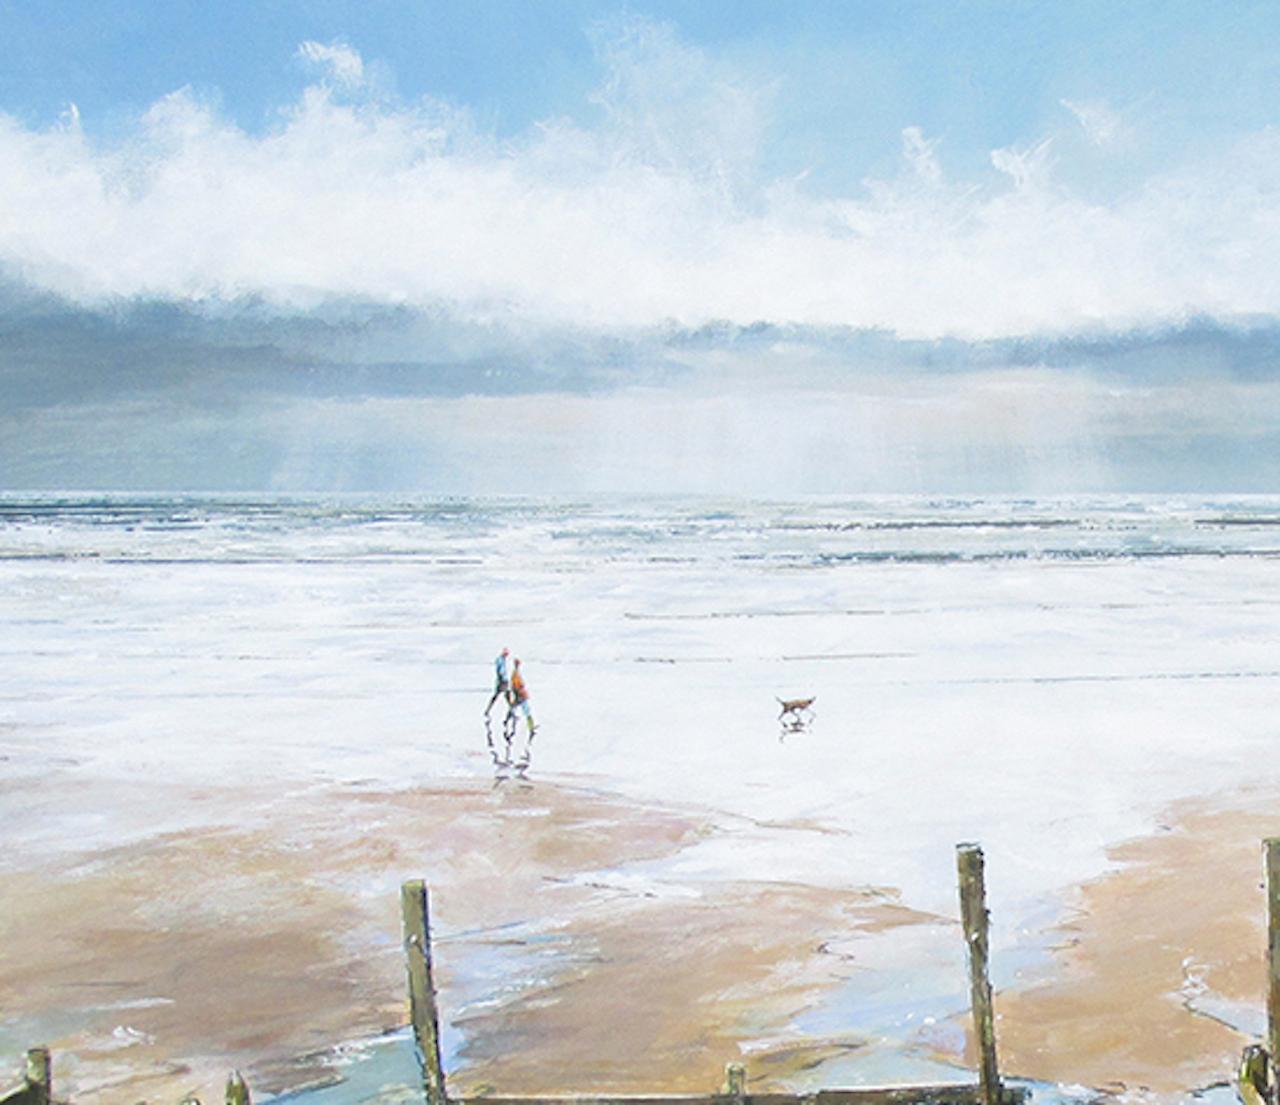 Michael Sanders
A Walk on Sheringham Beach
Original Seascape Painting
Mixed-Media on Canvas
Ccanvas Size: H 76cm x W 121cm x D 3.8cm
Sold Unframed
Ready to Hang
Please note that in situ images are purely an indication of how a piece may look.

A